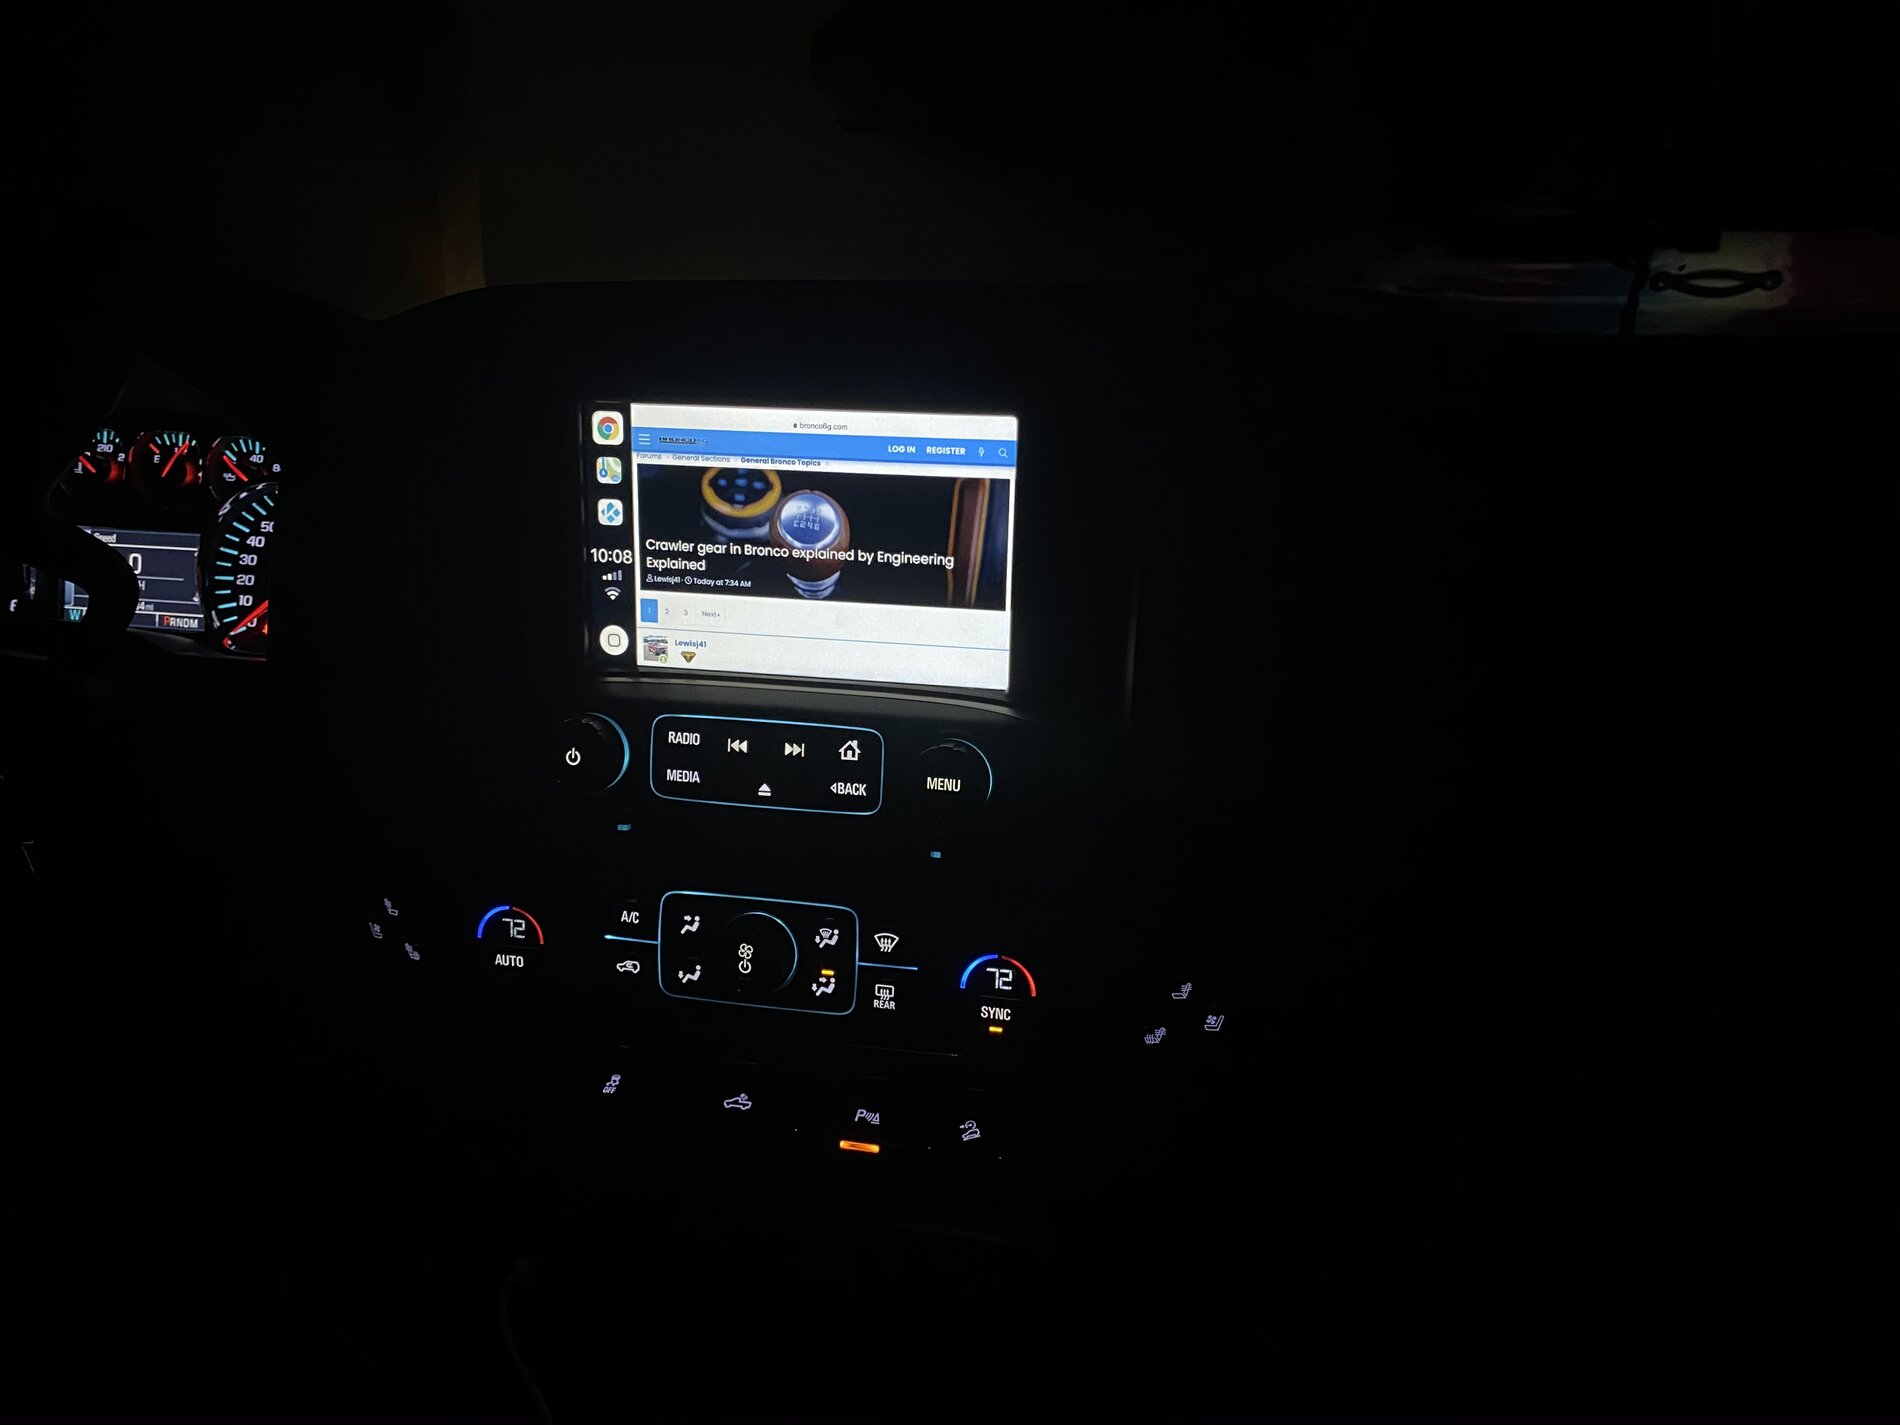 Ford Bronco “Hacked” Apple CarPlay - Using CarBridge to Display Non-Native Apps F343B0D3-D777-4591-9C96-3611FAAC11DB